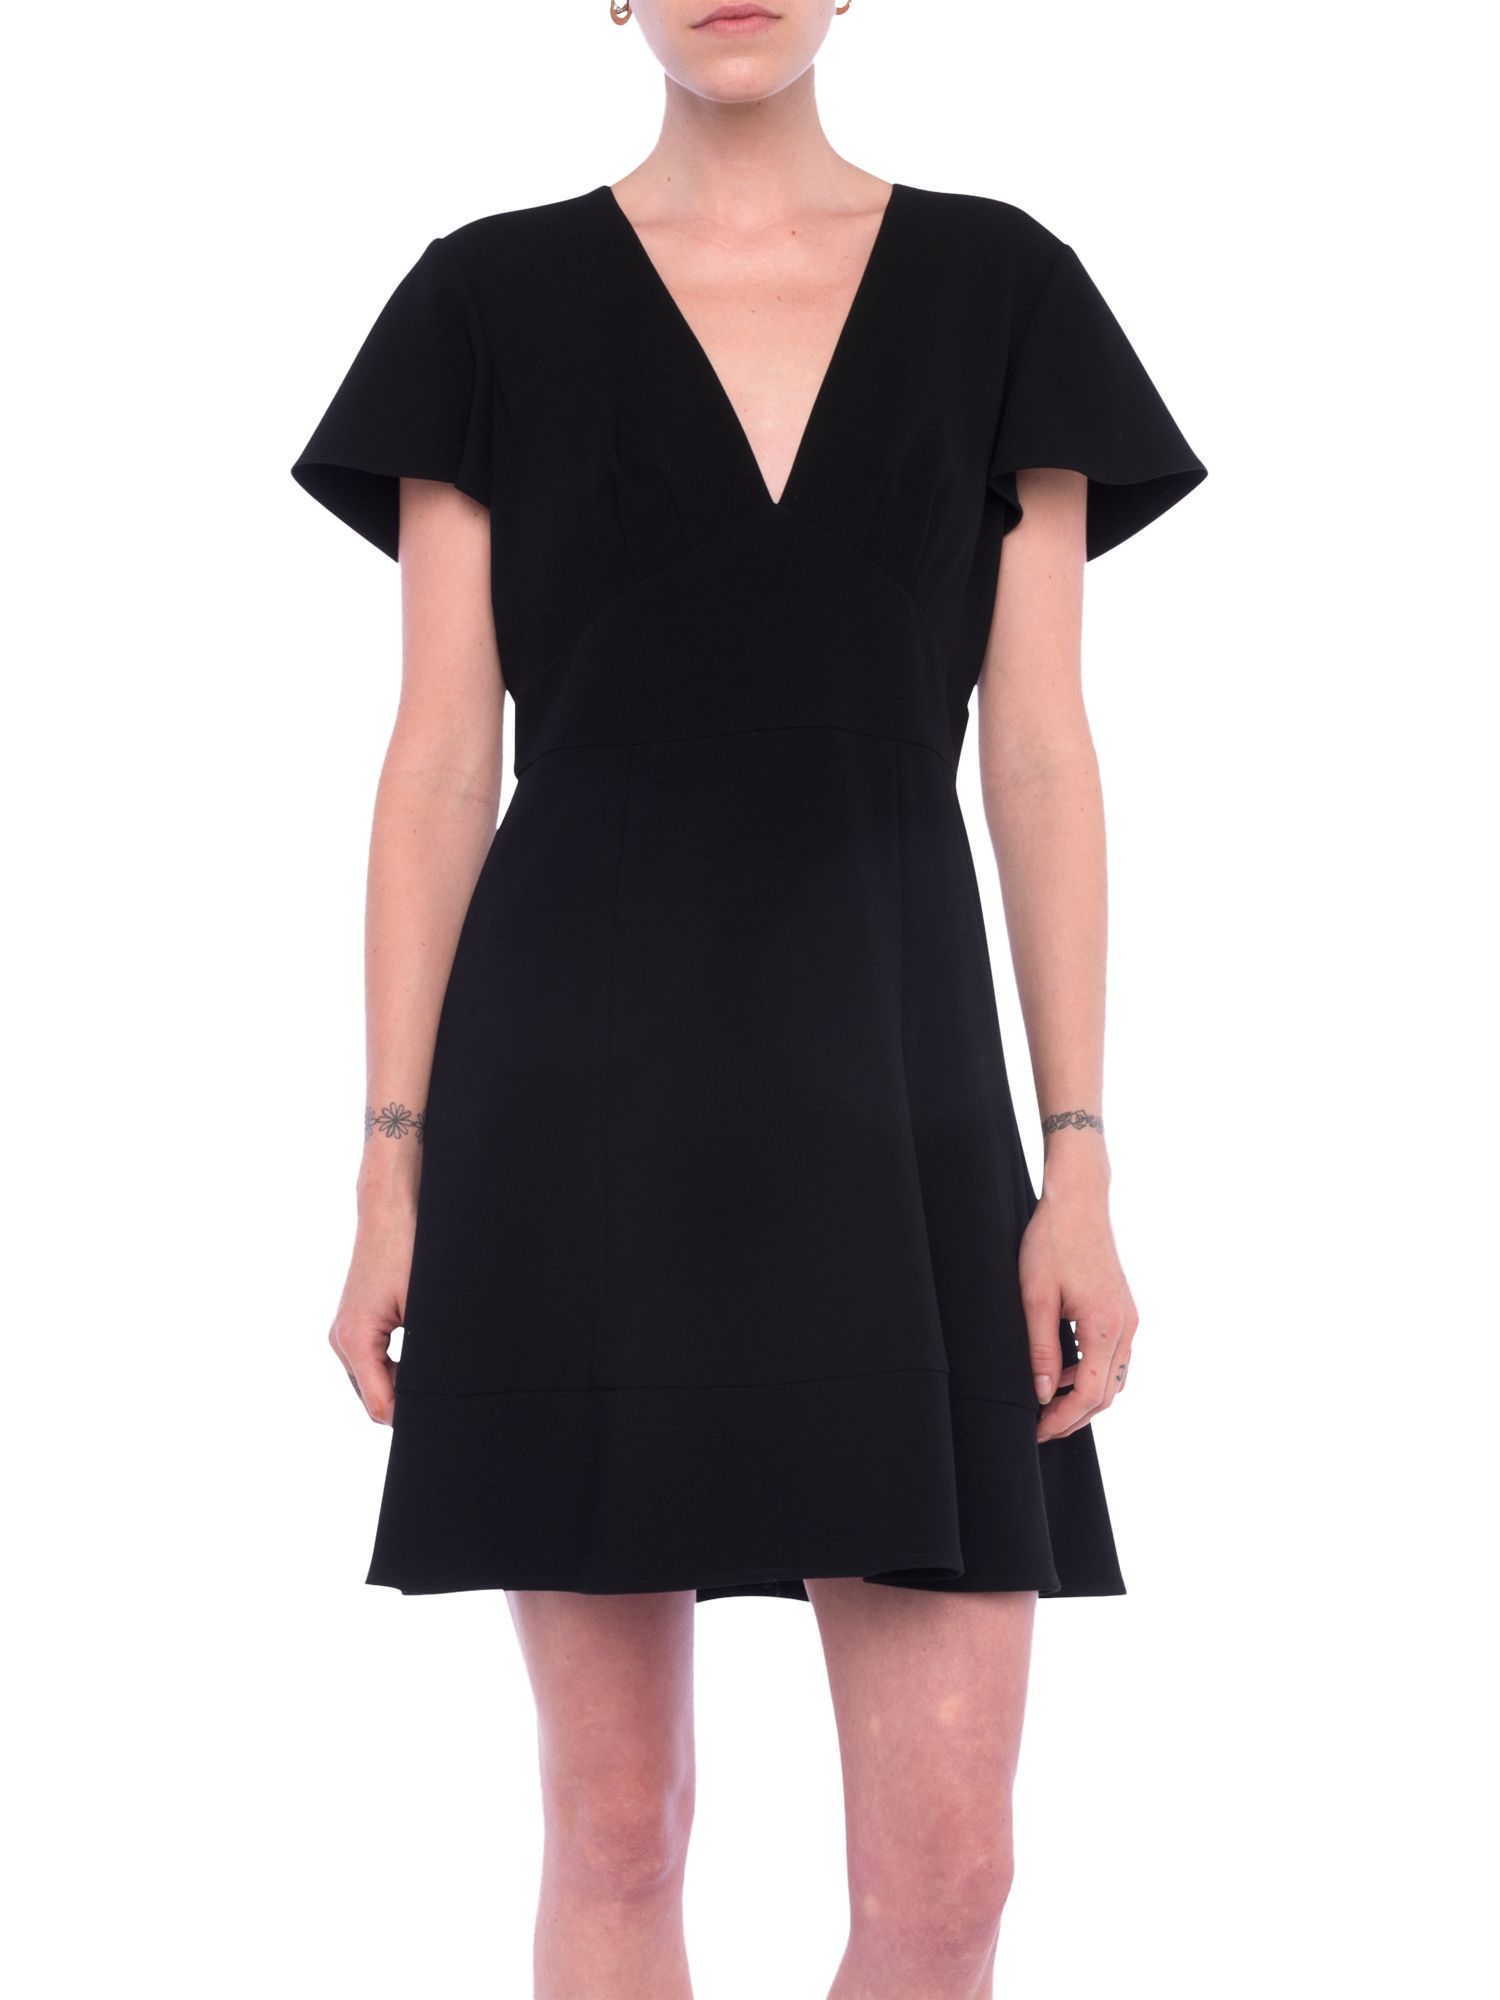 French Connection Ruth Dress, Black, 6